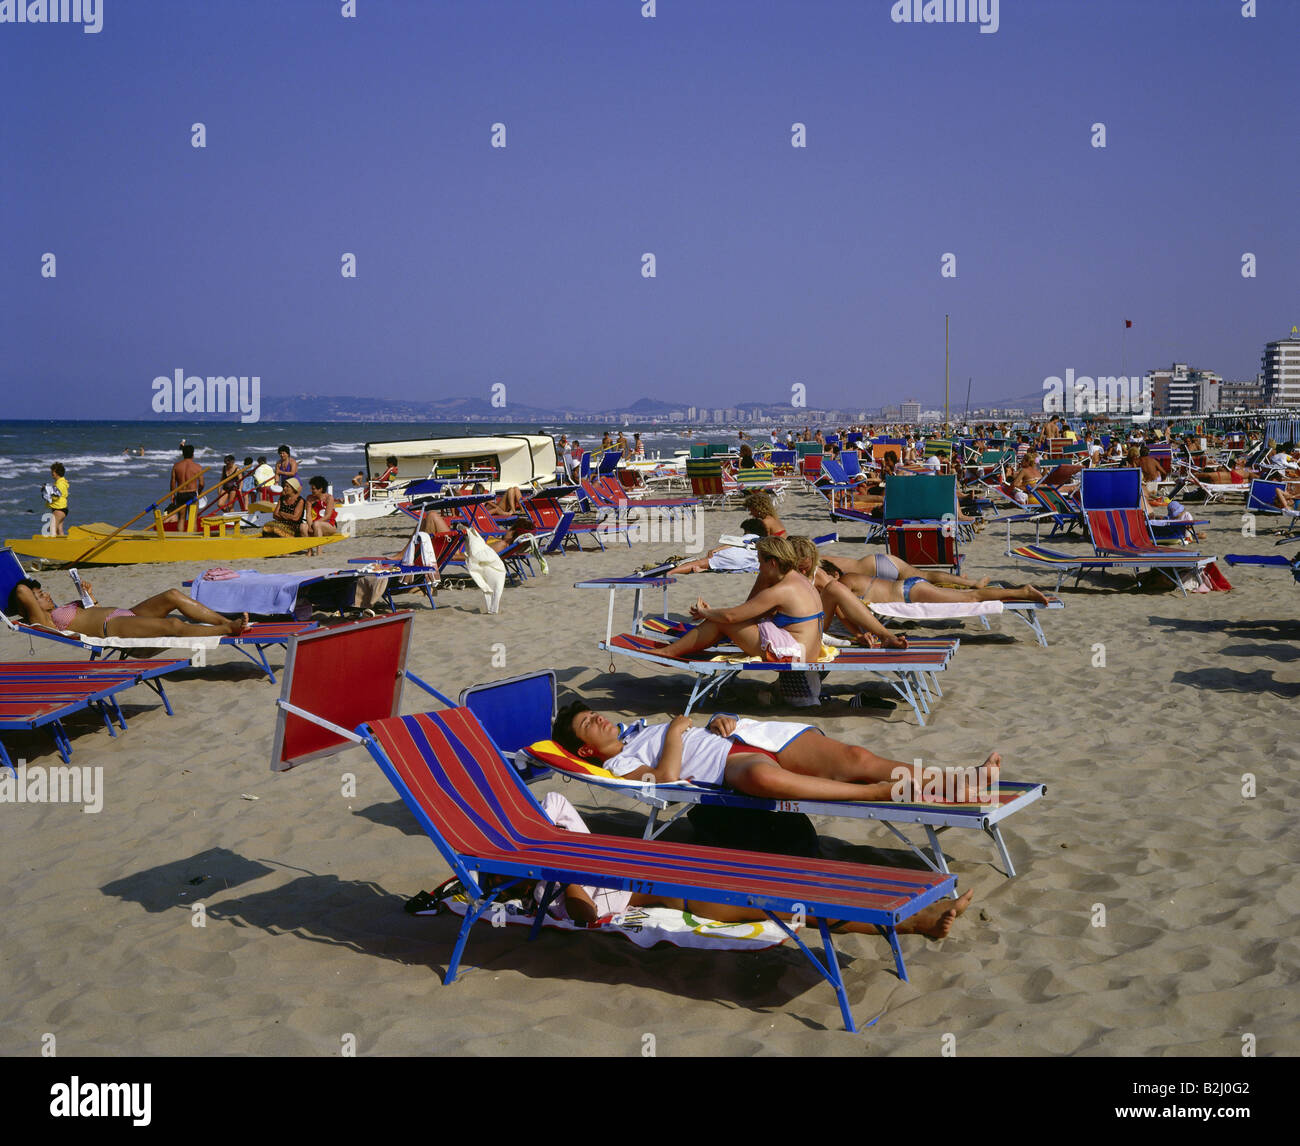 geography / travel, Italy, Riccione, beach, tourists, emilia romagna, nothern italy, Europe, tourism, holiday, holidays, vacation, travel, summer, holiday, adriatic sea, Stock Photo